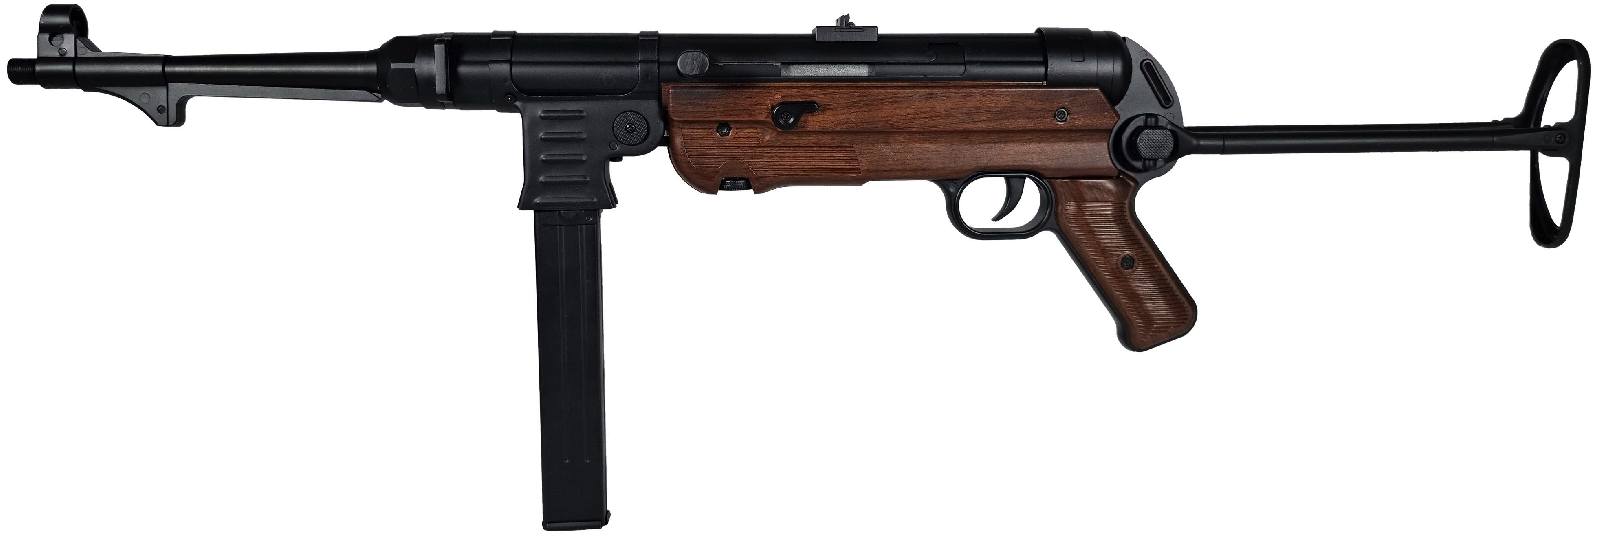 Discover our Schmeisser MP40